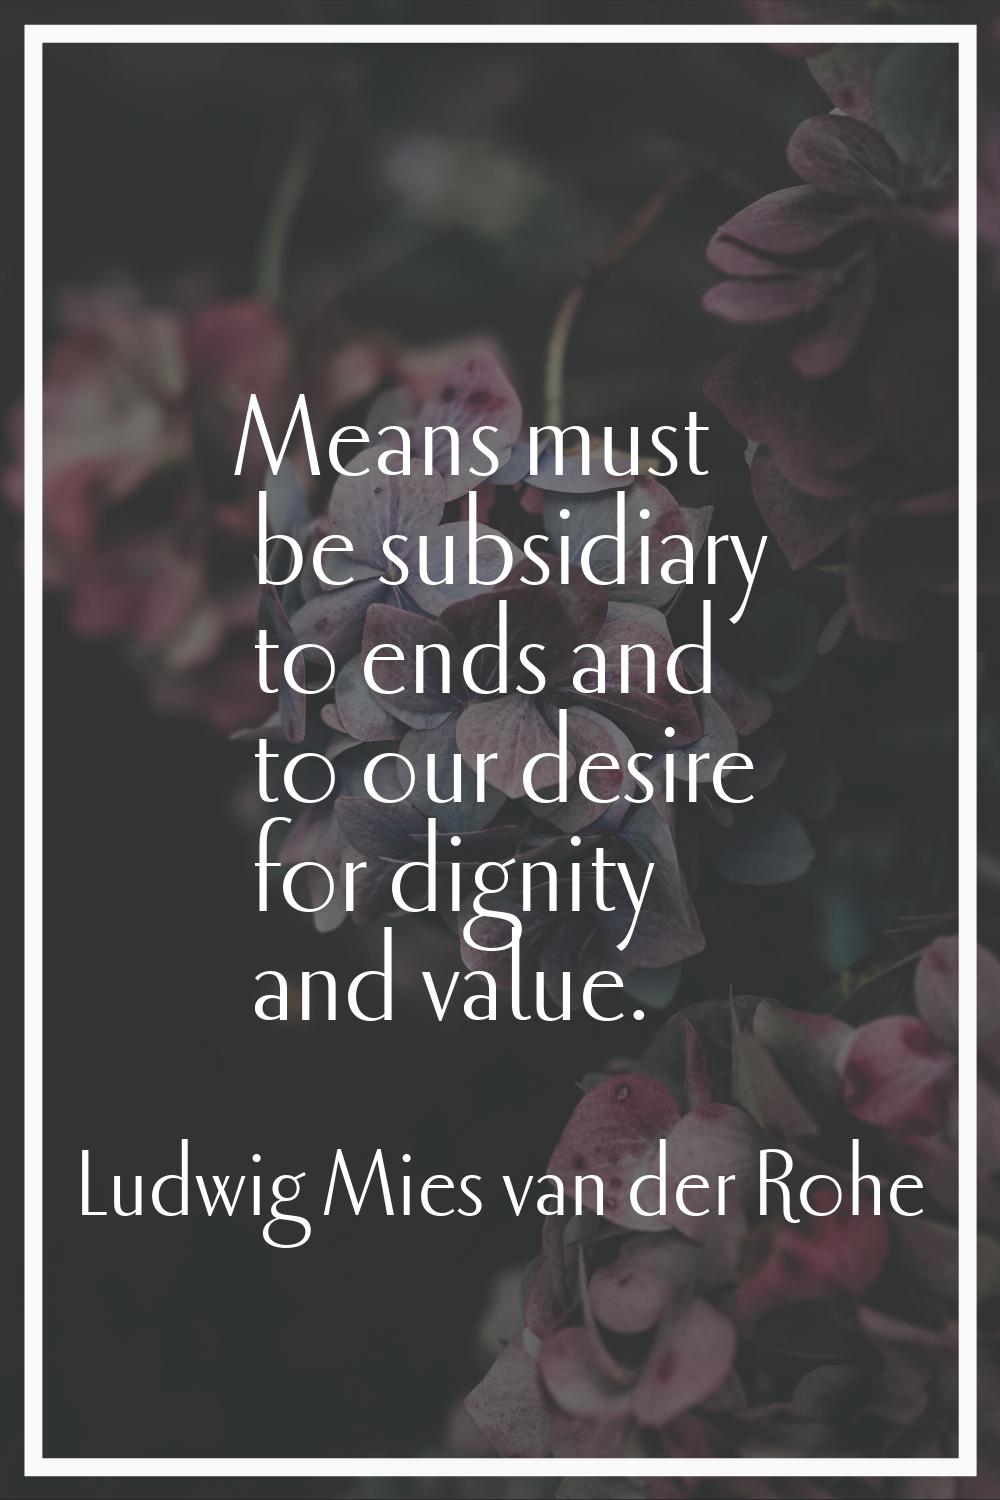 Means must be subsidiary to ends and to our desire for dignity and value.